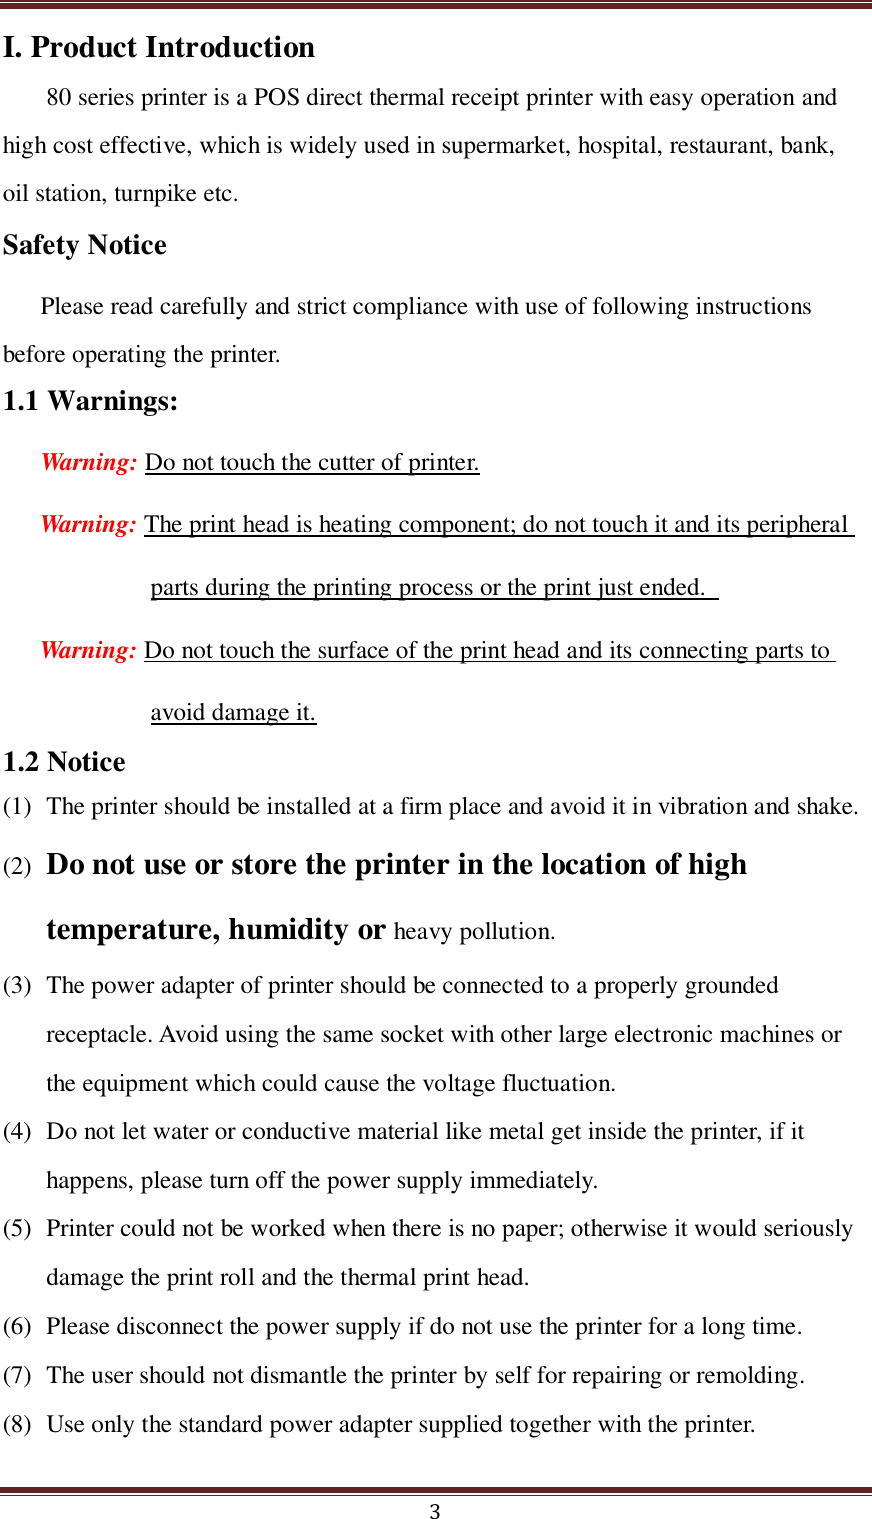  3 I. Product Introduction 80 series printer is a POS direct thermal receipt printer with easy operation and high cost effective, which is widely used in supermarket, hospital, restaurant, bank, oil station, turnpike etc. Safety Notice Please read carefully and strict compliance with use of following instructions before operating the printer. 1.1 Warnings: Warning: Do not touch the cutter of printer. Warning: The print head is heating component; do not touch it and its peripheral parts during the printing process or the print just ended.   Warning: Do not touch the surface of the print head and its connecting parts to avoid damage it. 1.2 Notice (1) The printer should be installed at a firm place and avoid it in vibration and shake.     (2) Do not use or store the printer in the location of high temperature, humidity or heavy pollution. (3) The power adapter of printer should be connected to a properly grounded receptacle. Avoid using the same socket with other large electronic machines or the equipment which could cause the voltage fluctuation.   (4) Do not let water or conductive material like metal get inside the printer, if it happens, please turn off the power supply immediately.   (5) Printer could not be worked when there is no paper; otherwise it would seriously damage the print roll and the thermal print head. (6) Please disconnect the power supply if do not use the printer for a long time.   (7) The user should not dismantle the printer by self for repairing or remolding. (8) Use only the standard power adapter supplied together with the printer. 